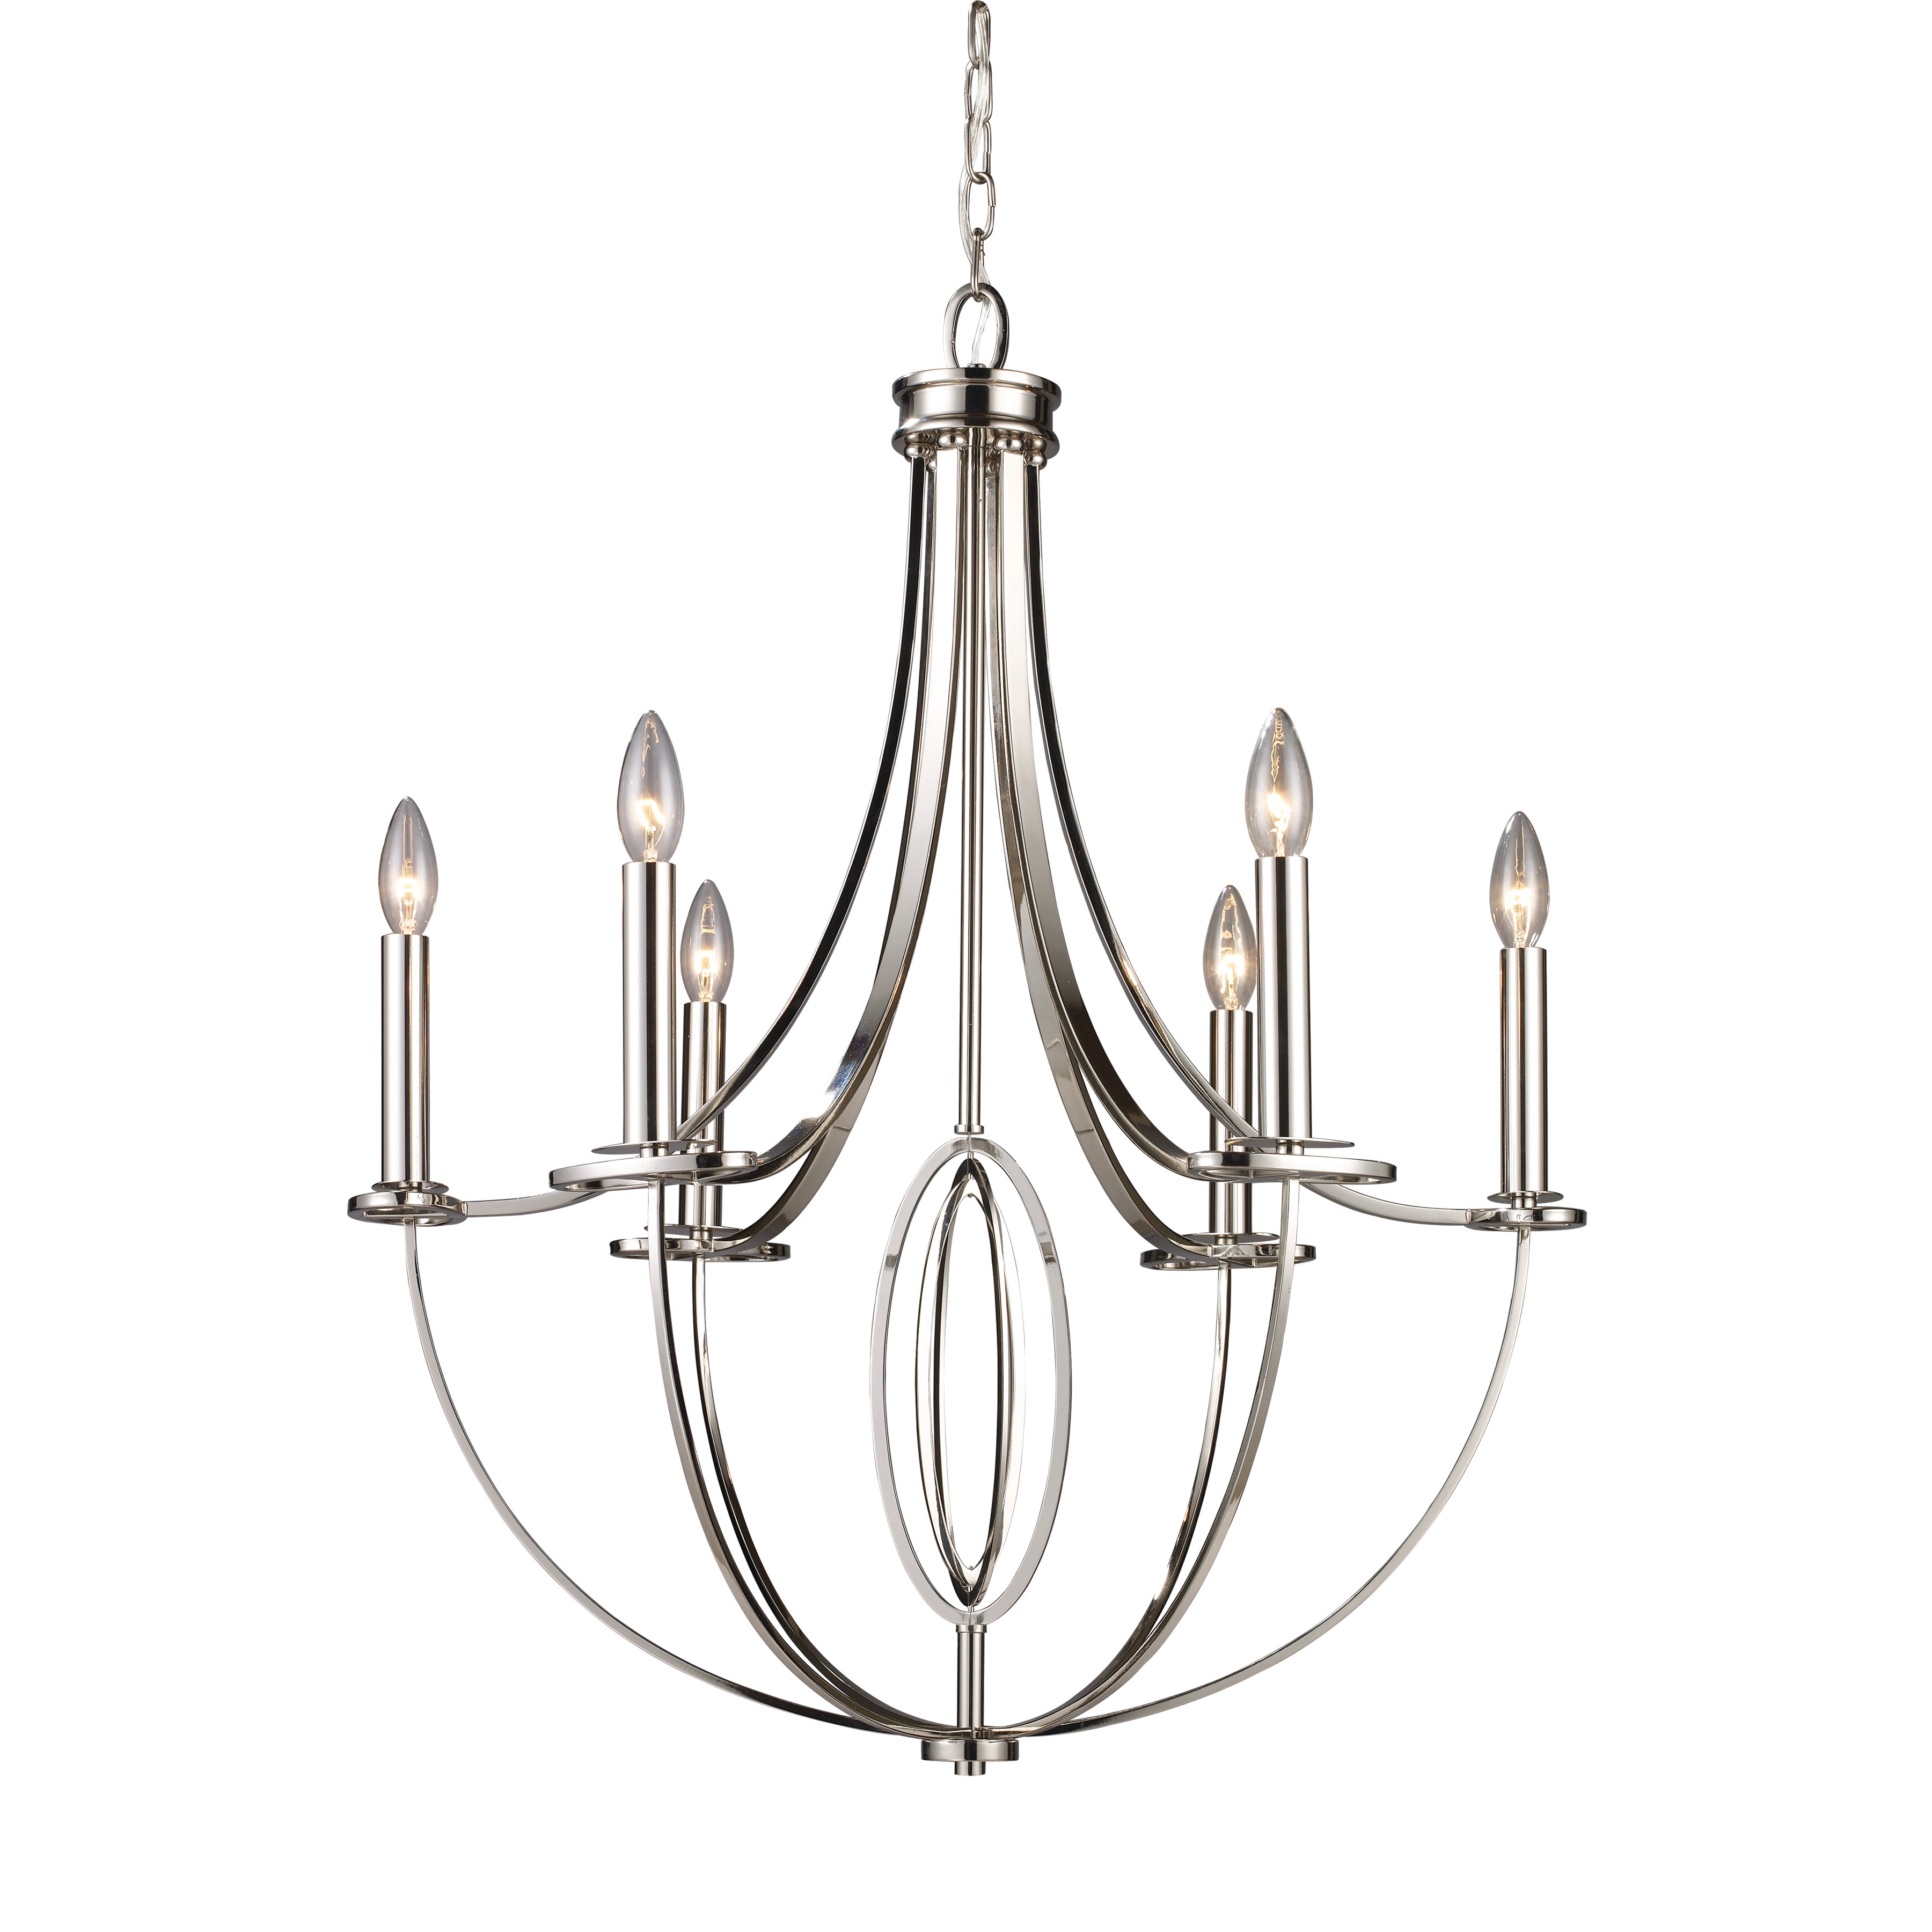 Demo FT product - Dione 25'' Wide 6-Light Chandelier - Polished Nickel